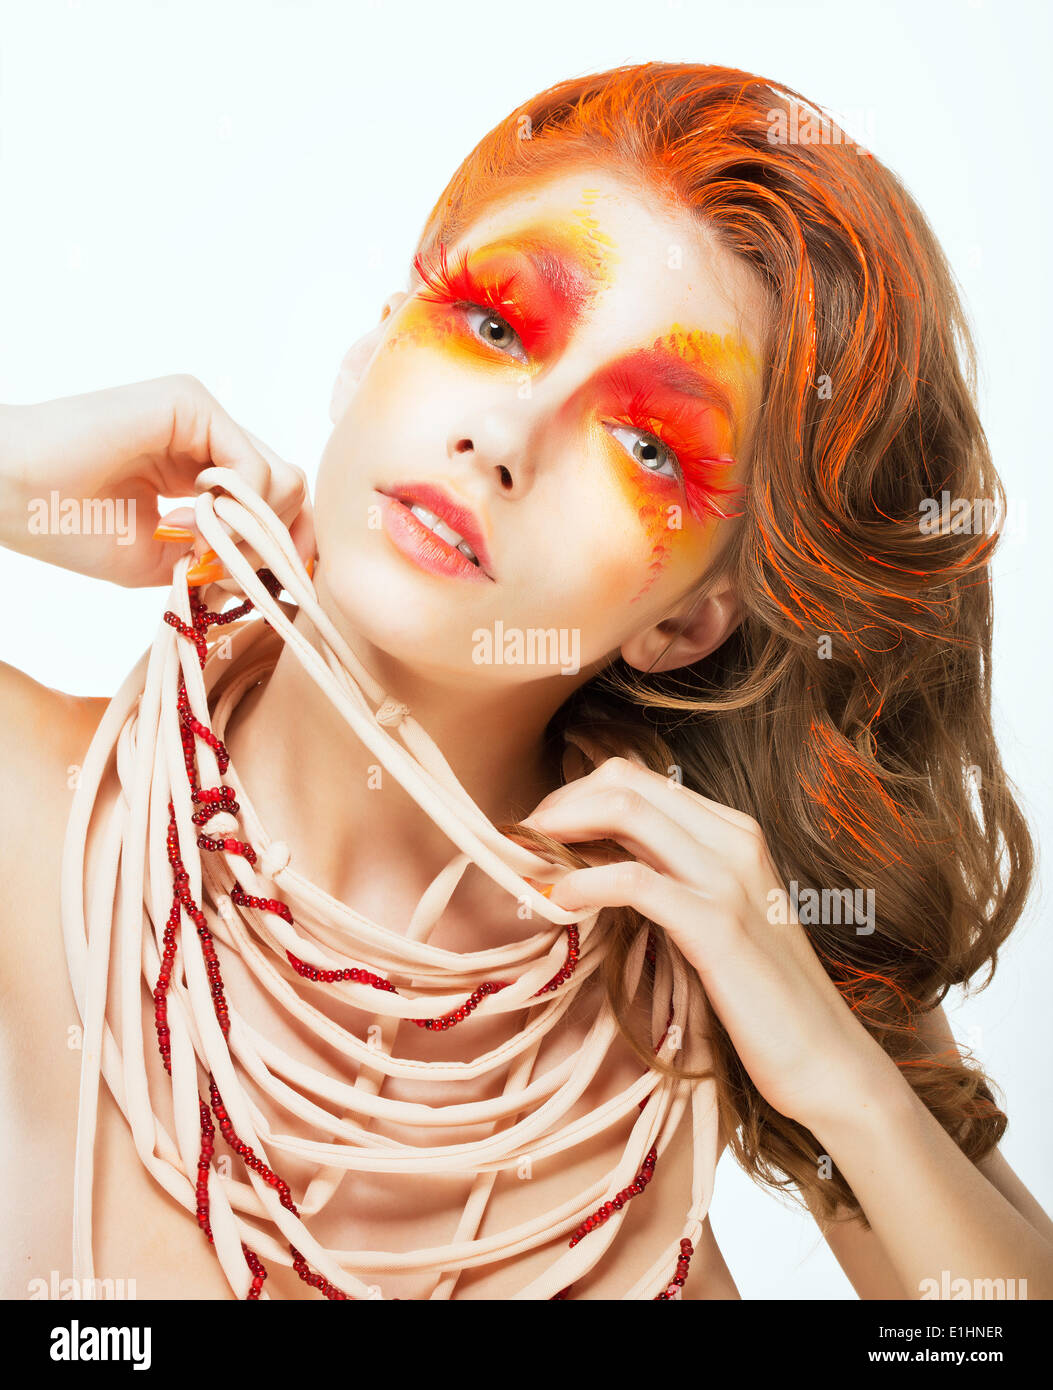 Expression. Face of Bright Red Hair Artistic Woman. Art Concept Stock Photo